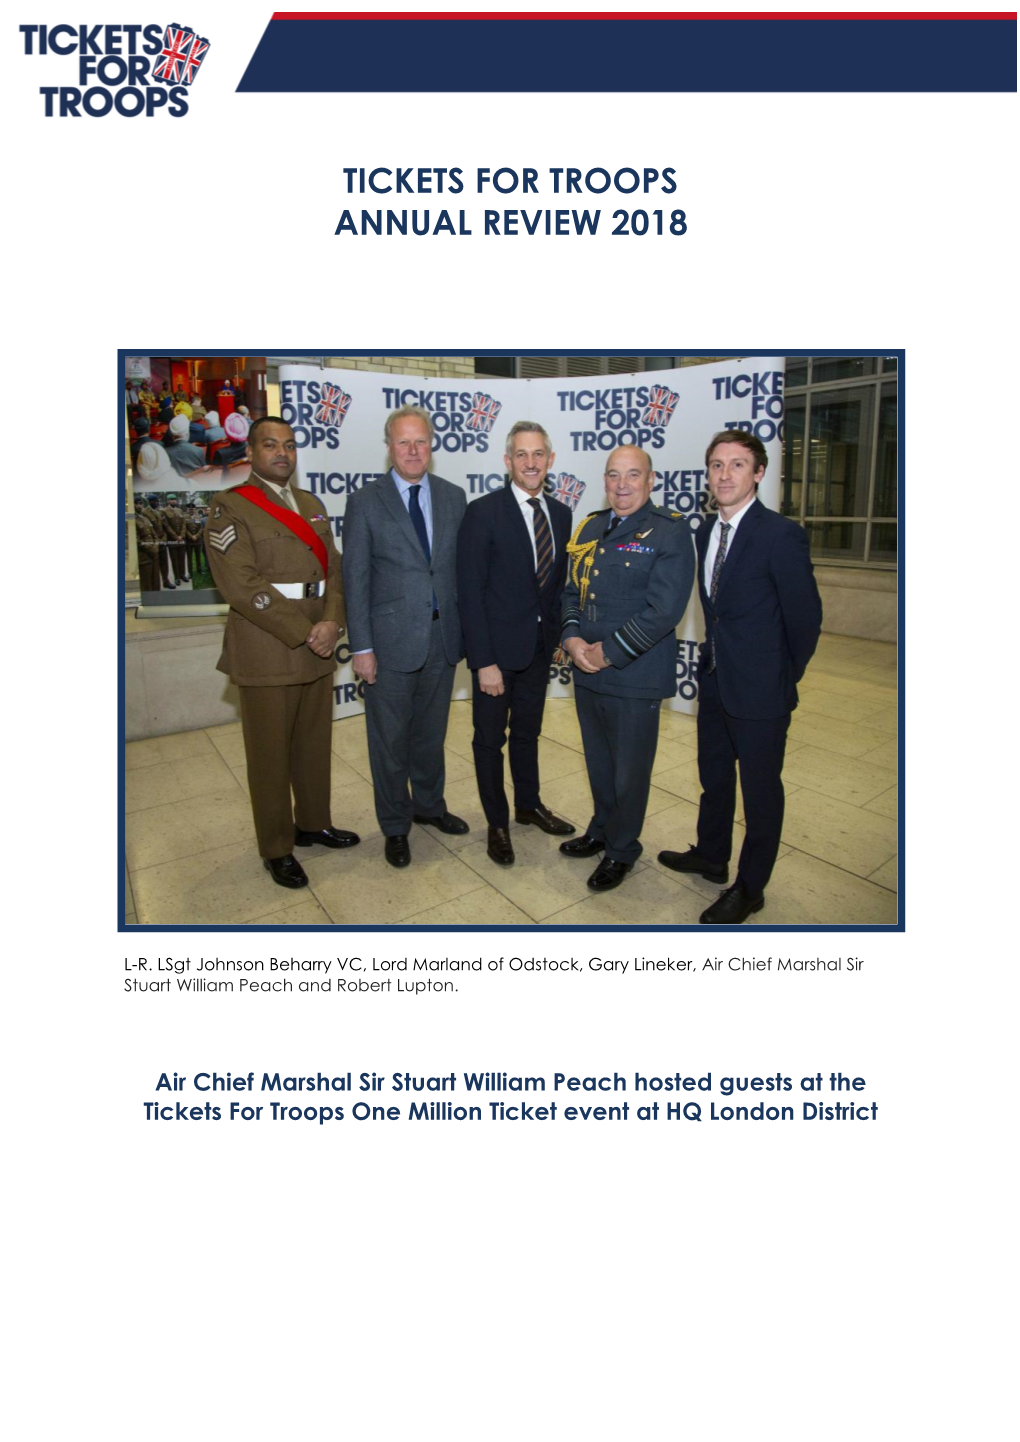 Tickets for Troops Annual Review 2018